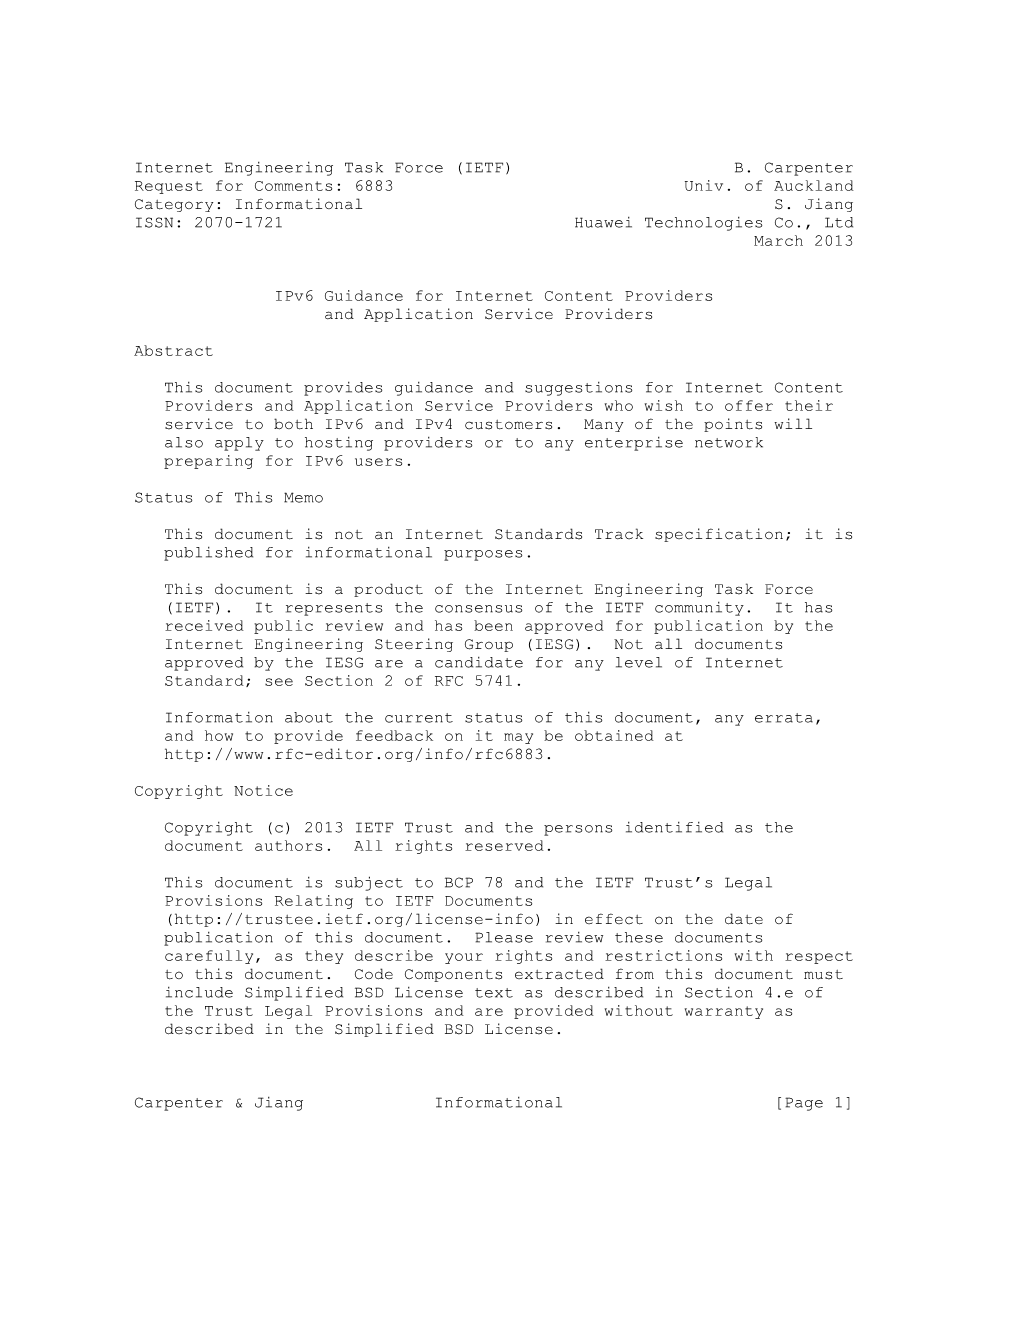 (IETF) B. Carpenter Request for Comments: 6883 Univ. of Auckland Category: Informational S